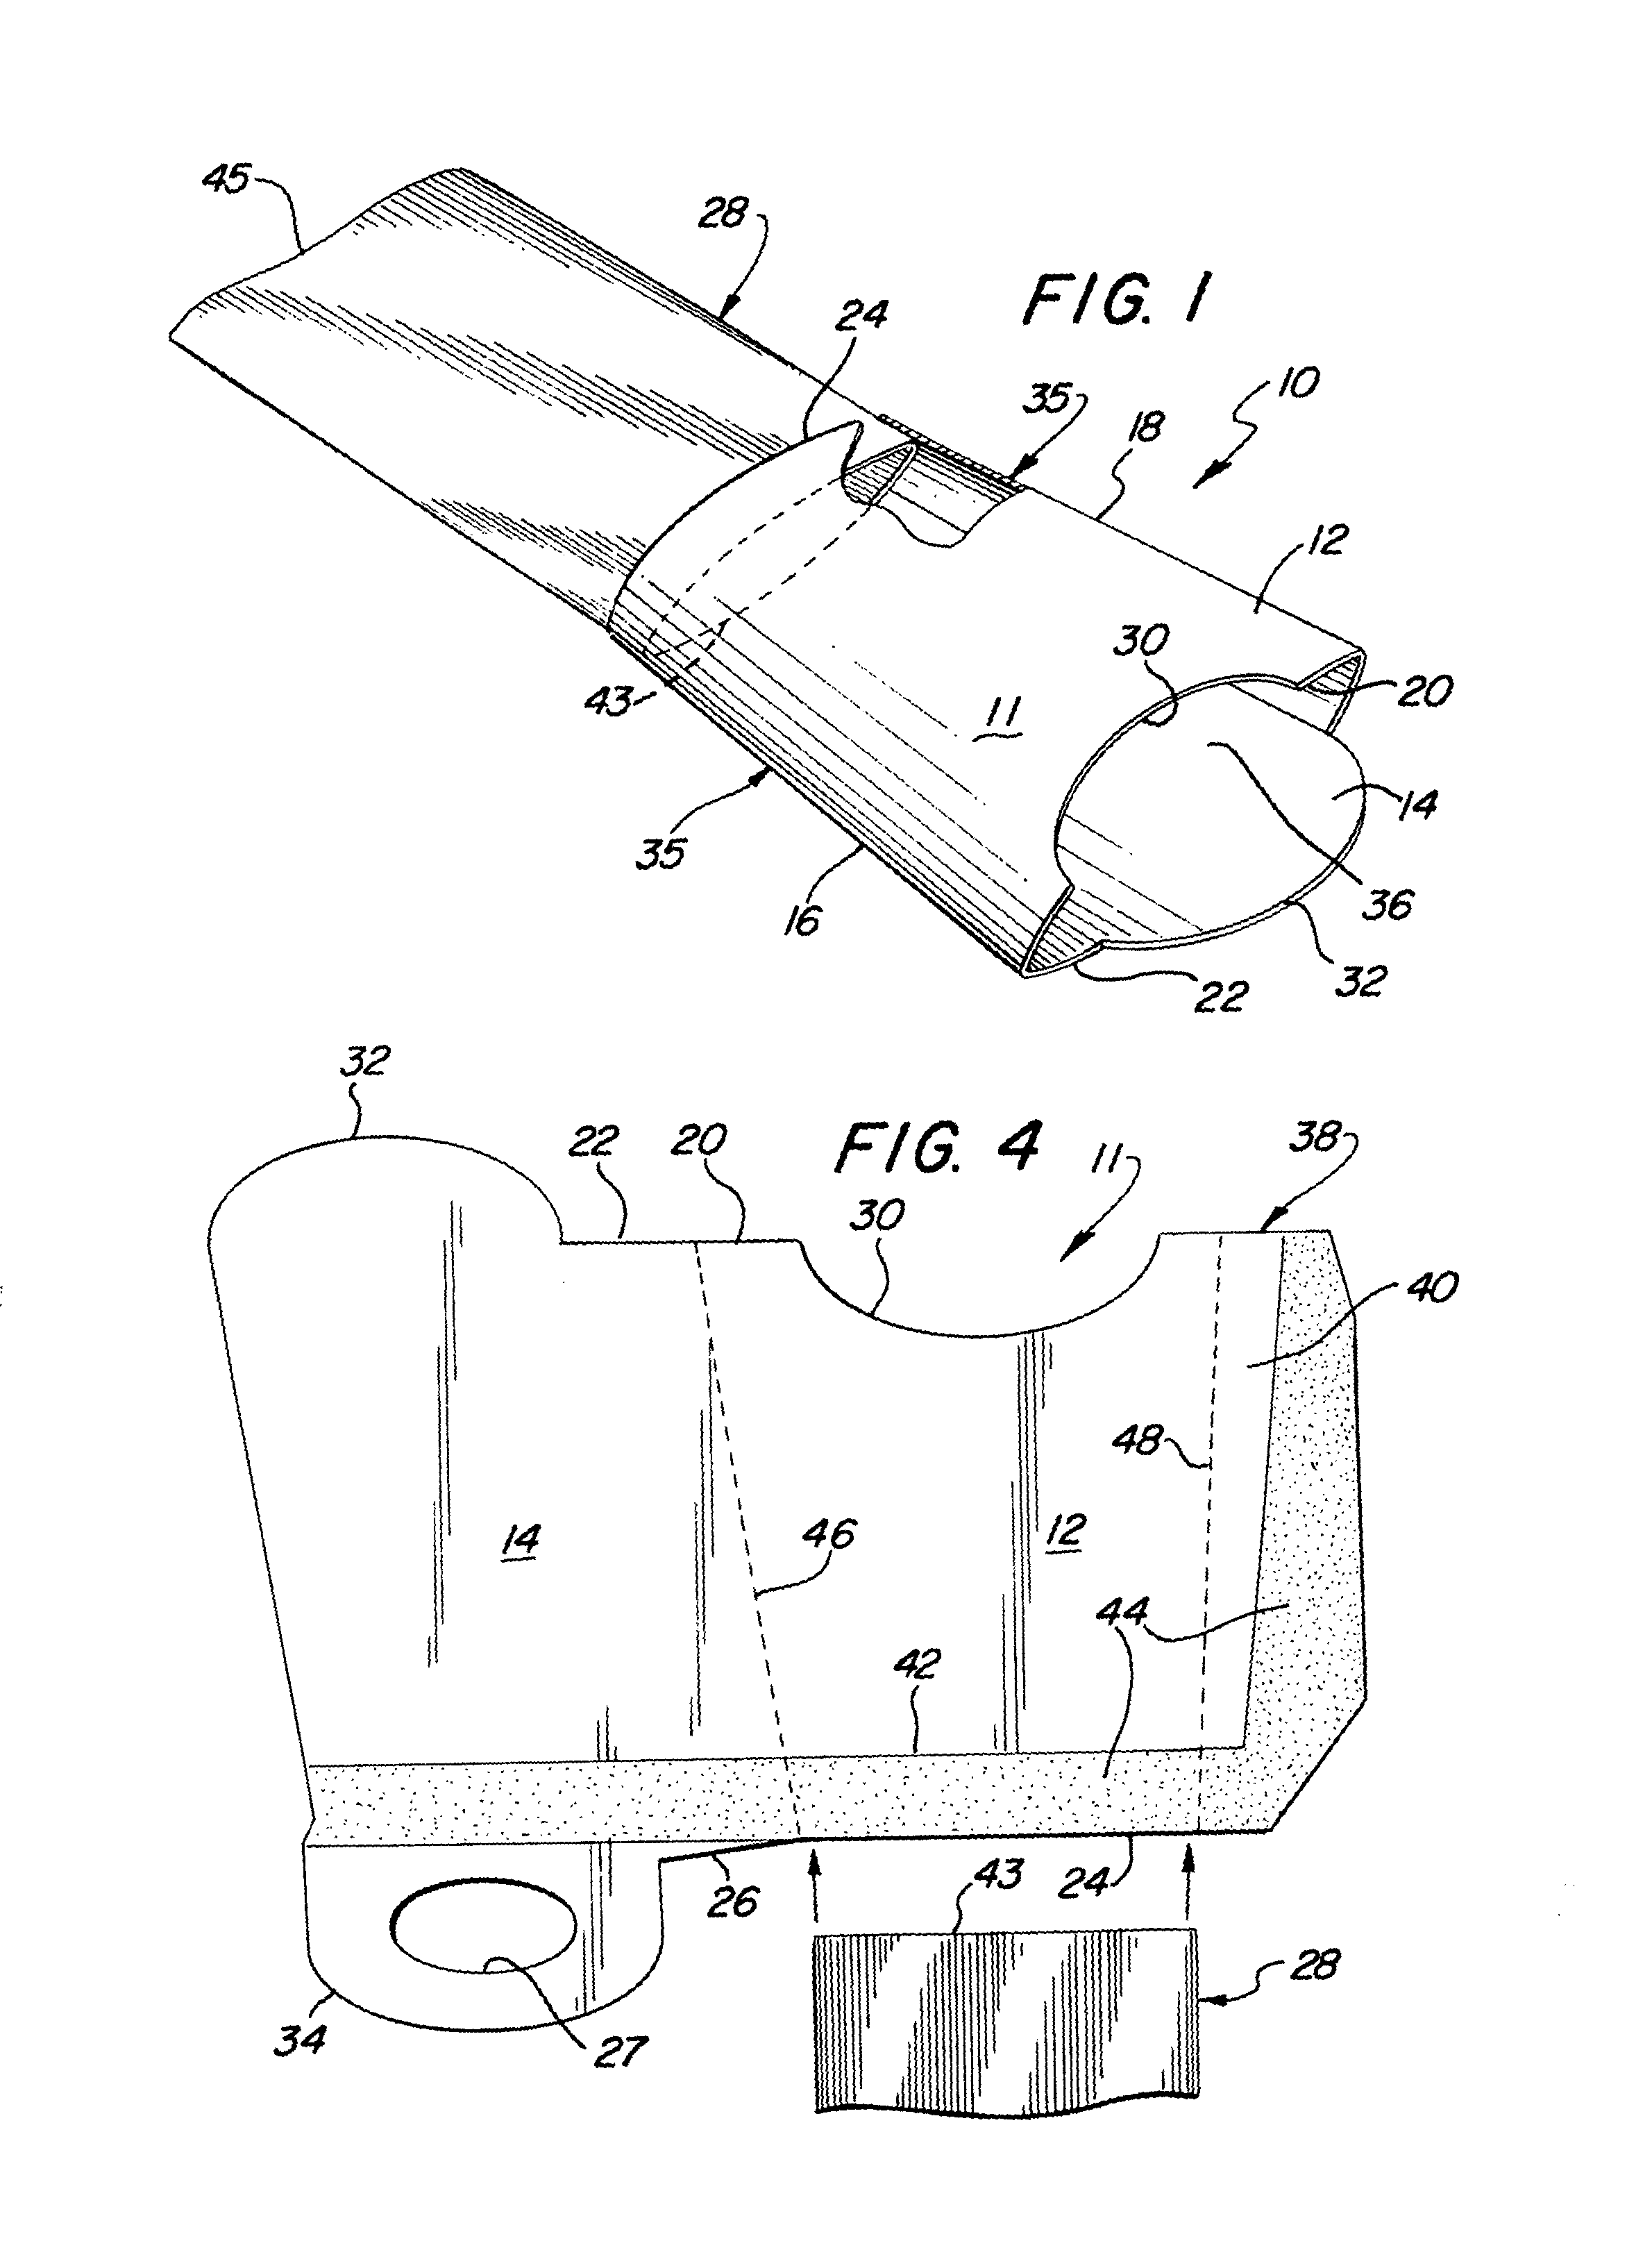 Disposable animal waste cleaning device and method of making